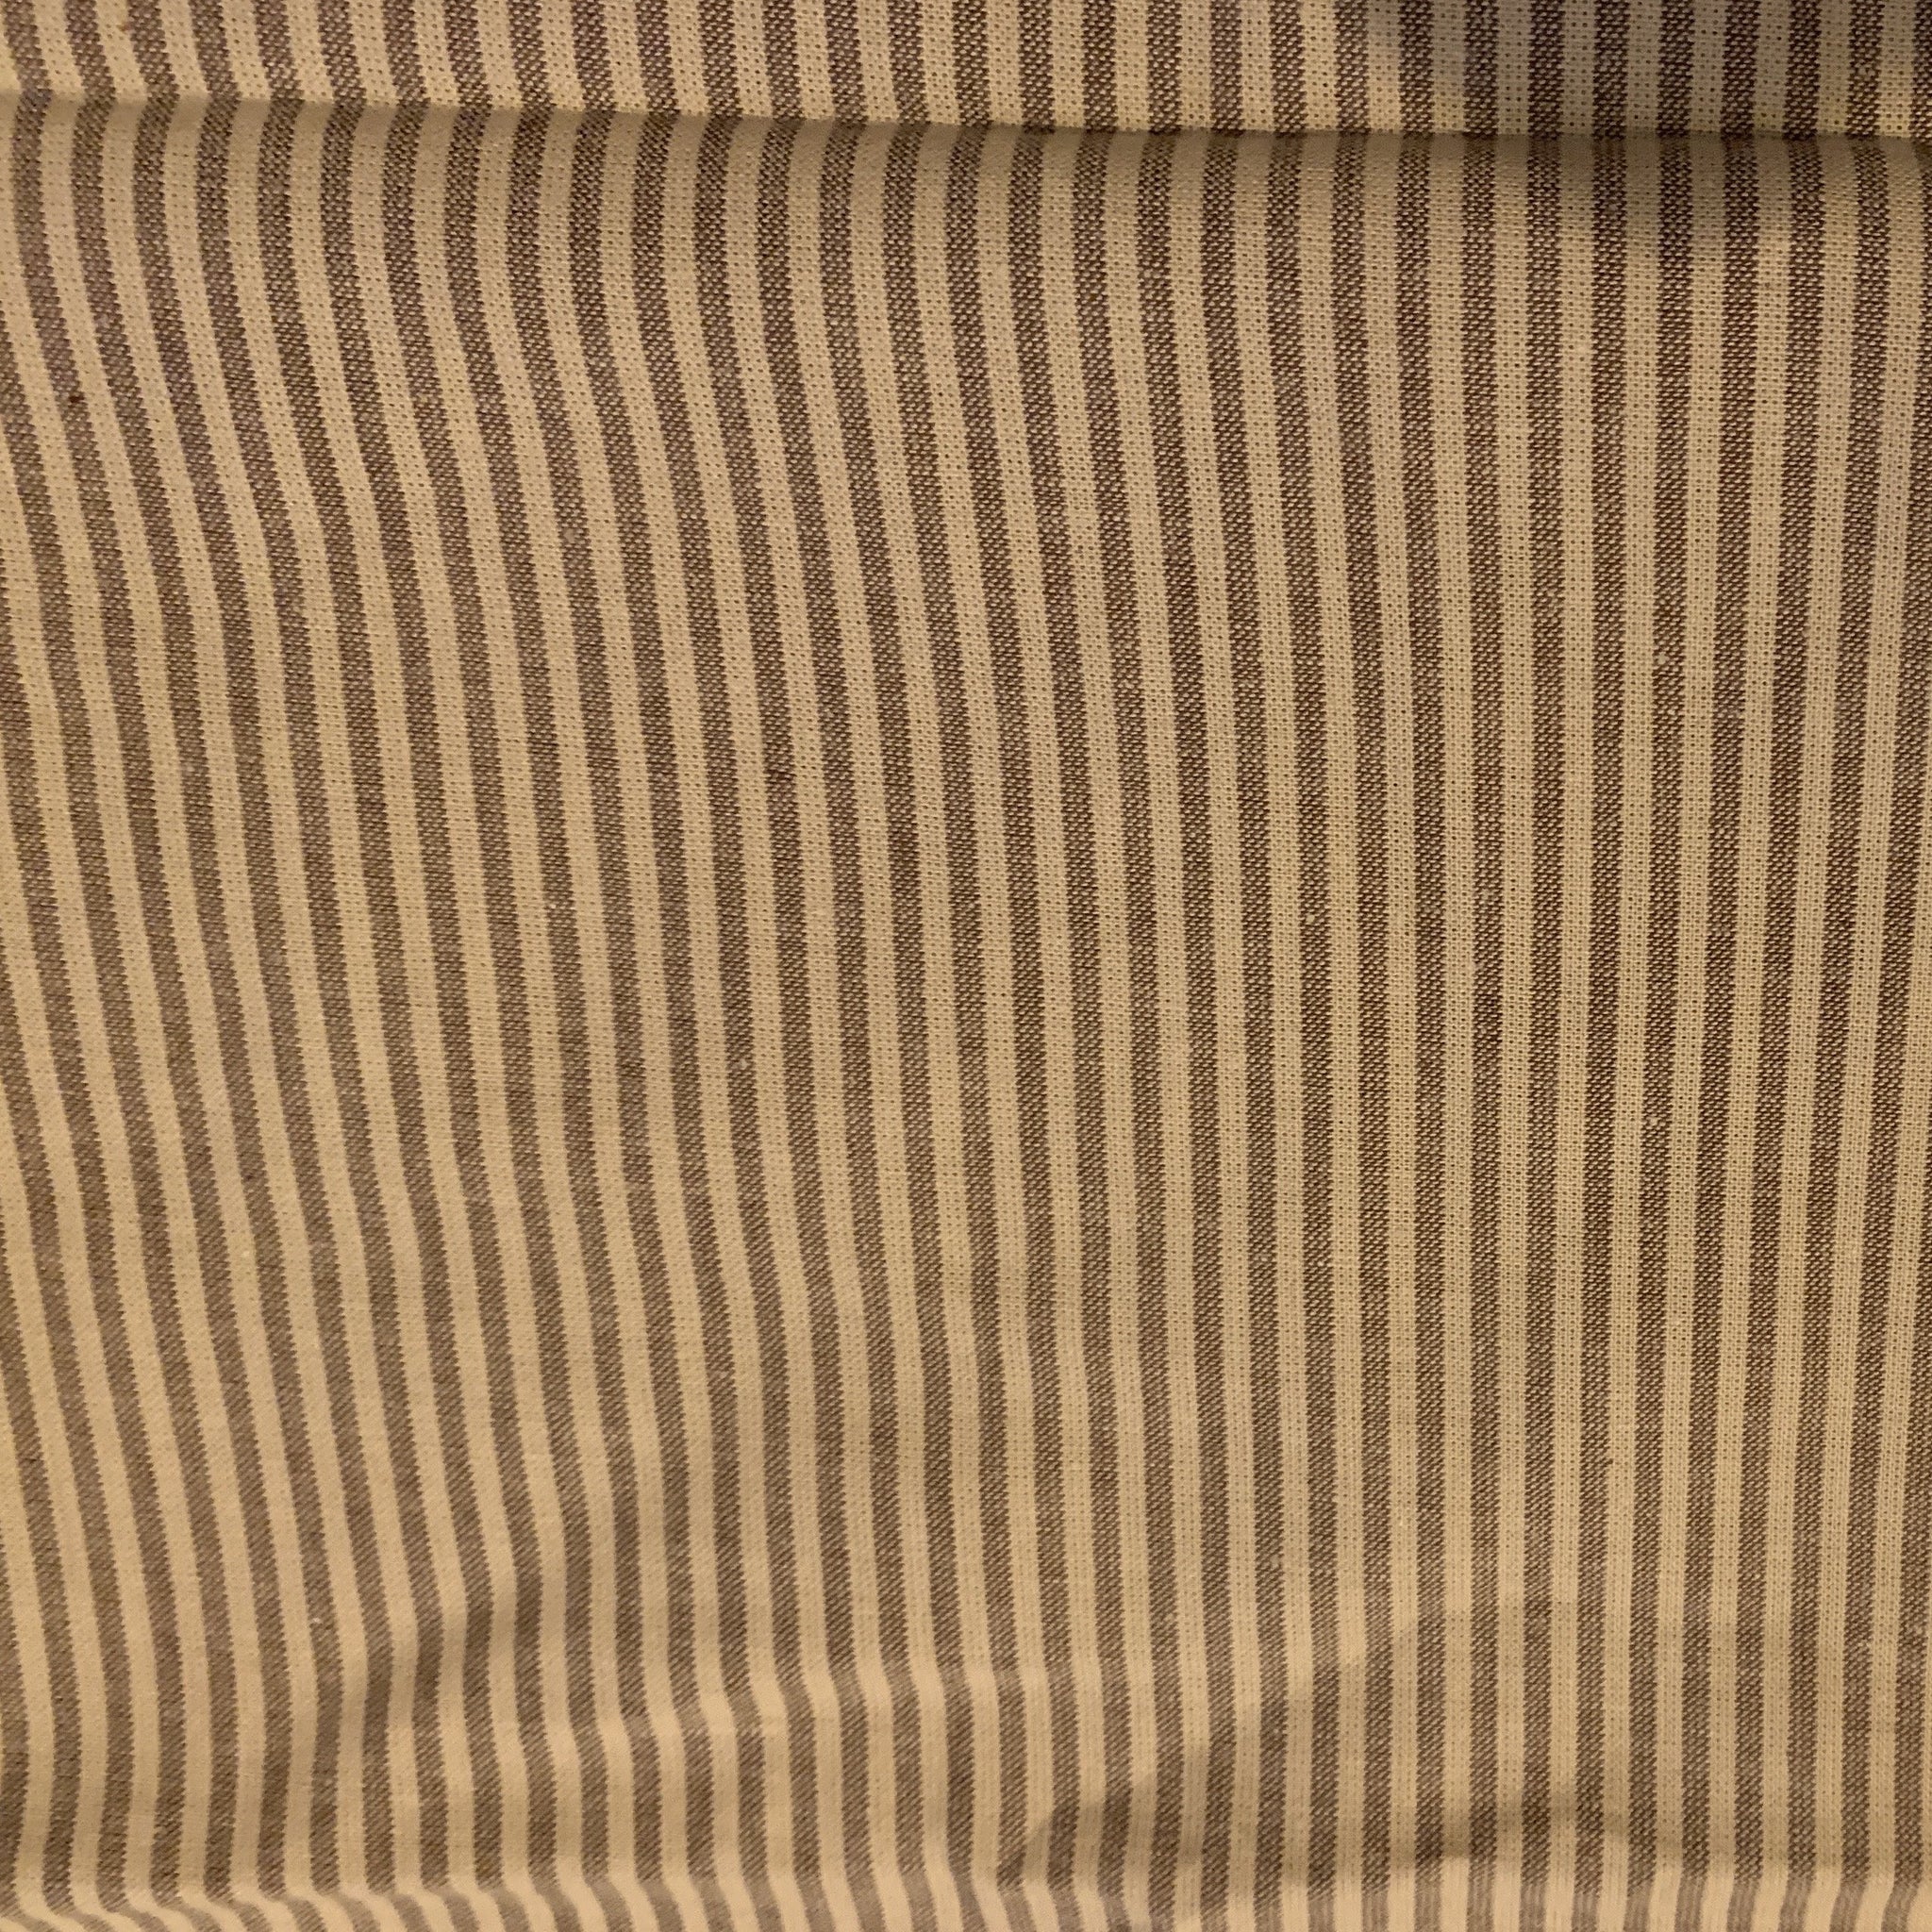 Sale Fabric Z105 : Brown & Natural Stripe Remnant 23" x 56" approx